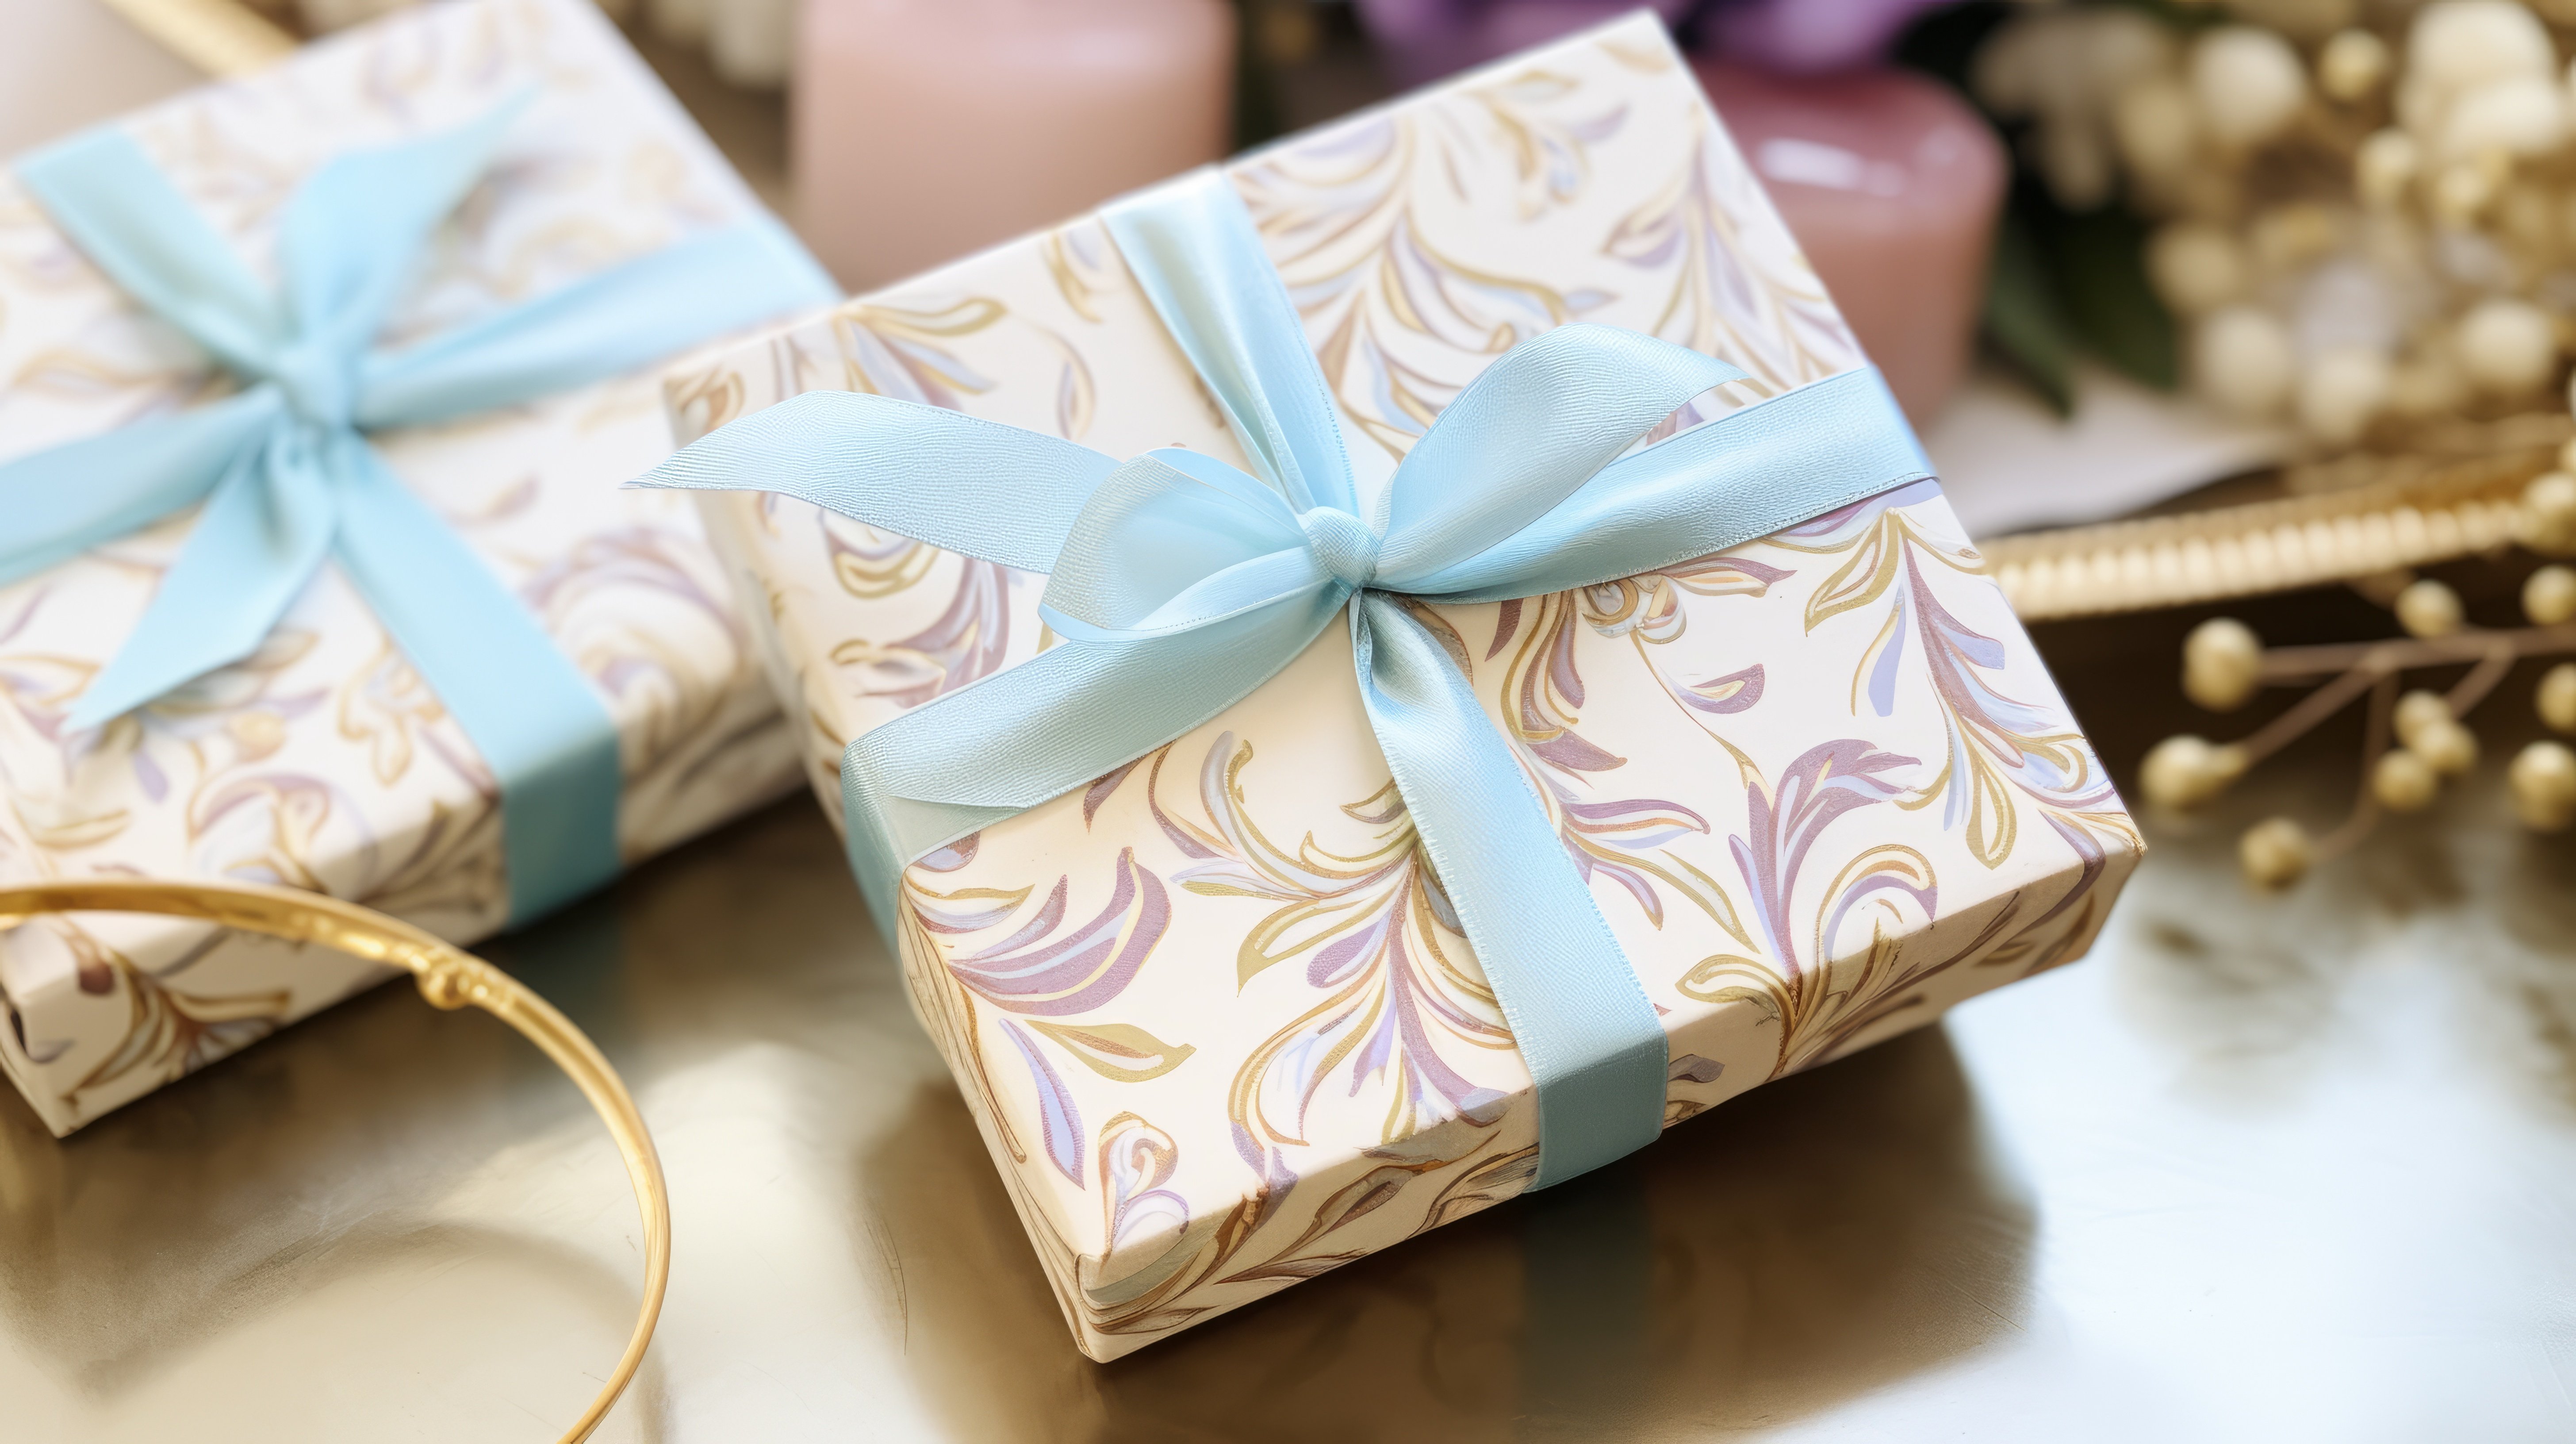 Top 5 All-Time Popular Wedding Favors from SG Wedding Favors